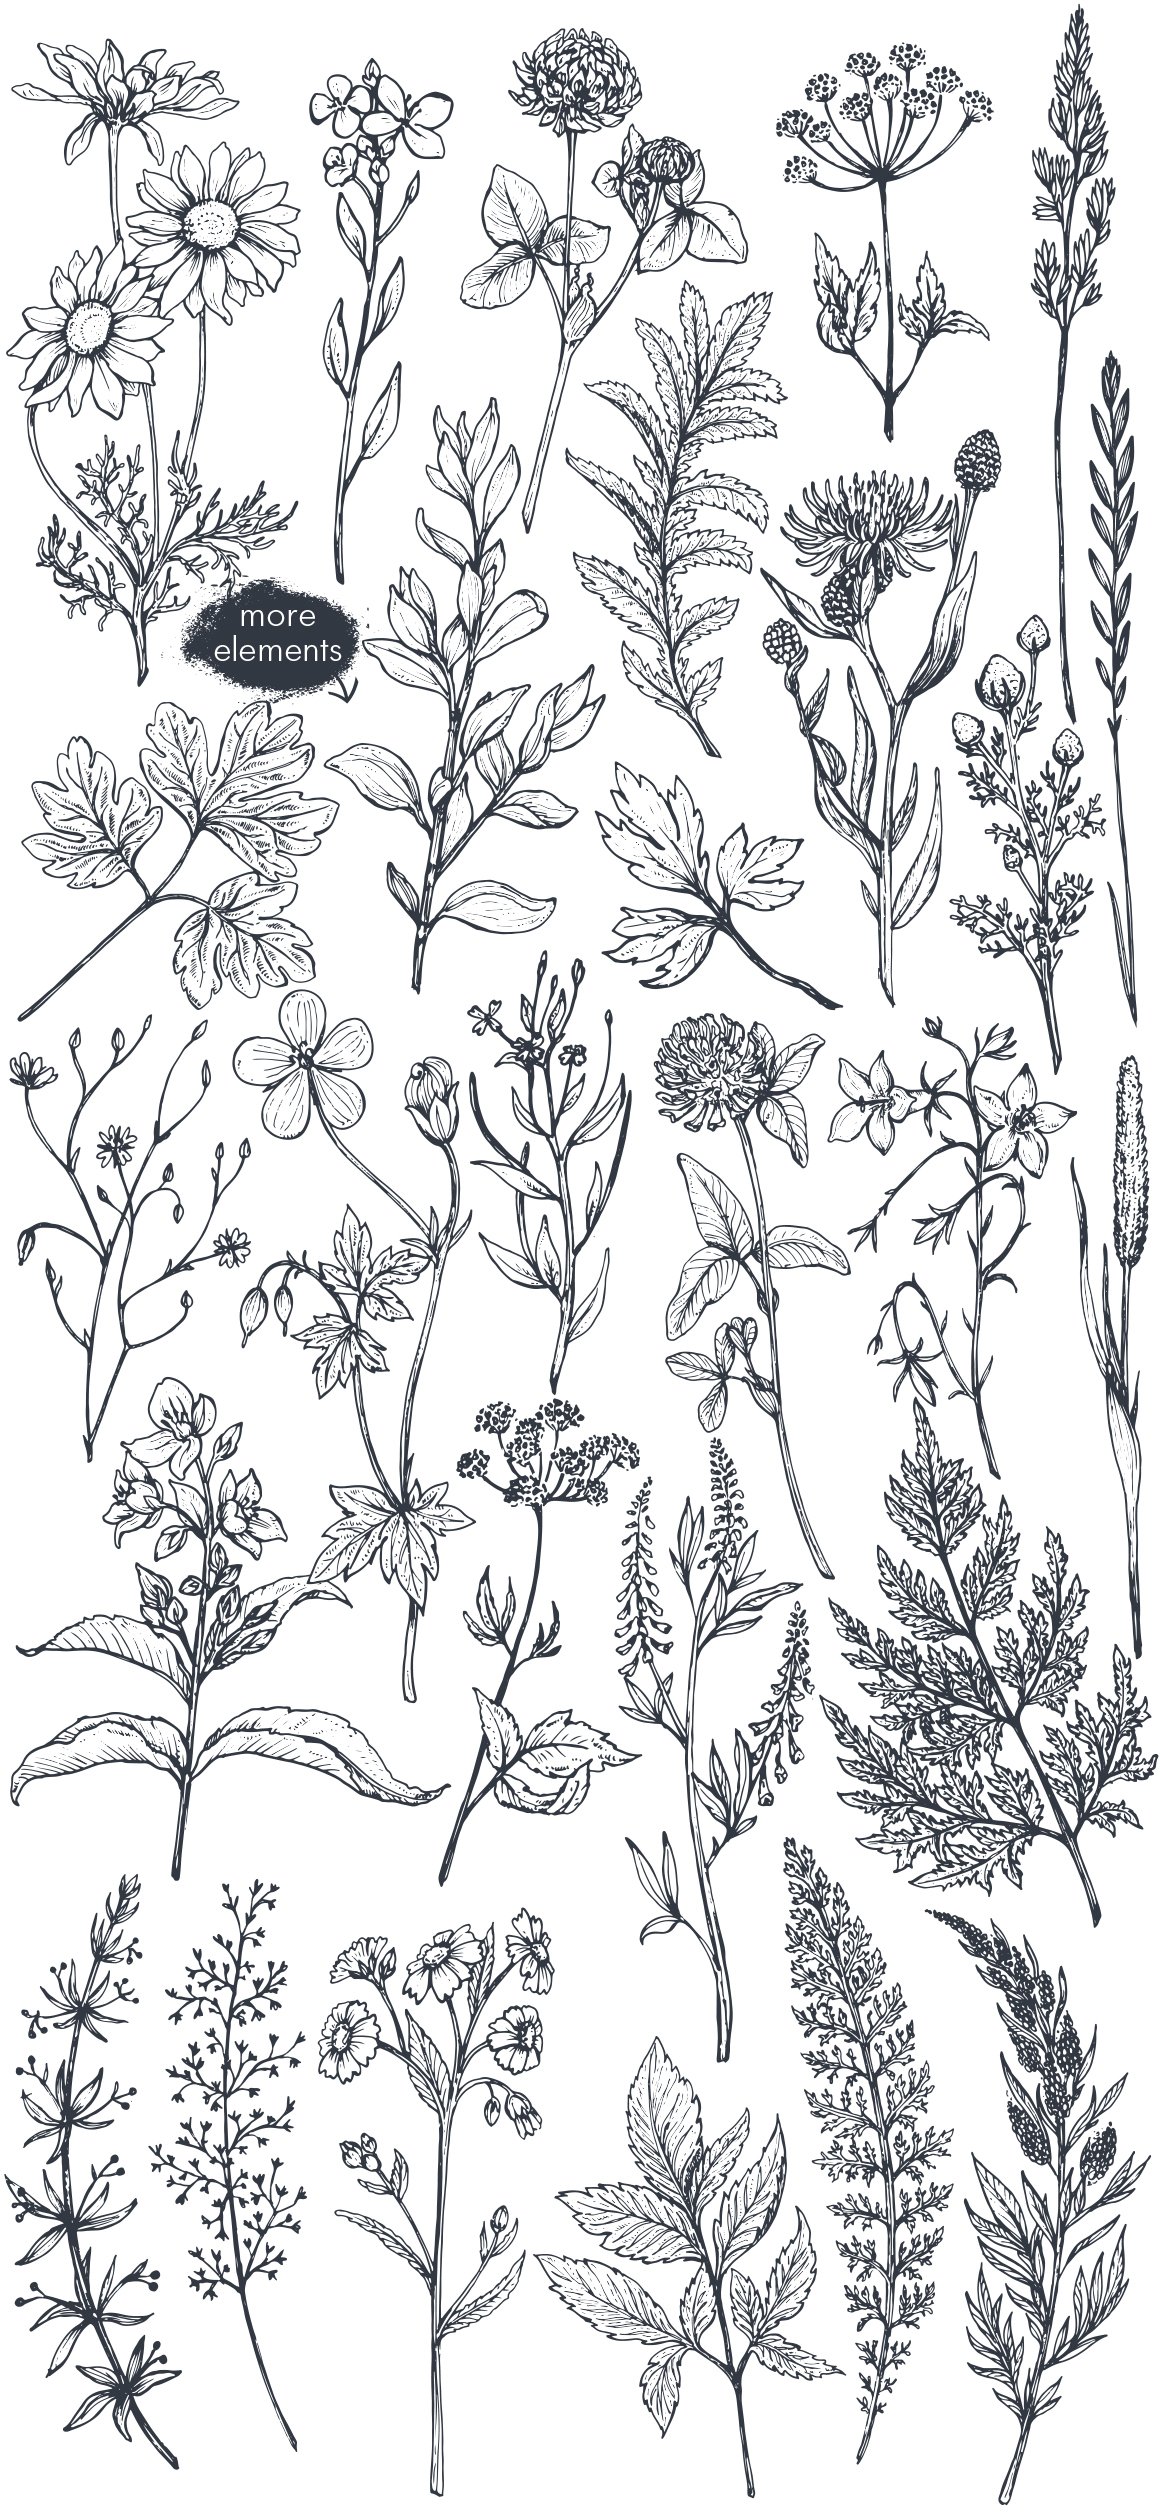 Herbs and wildflowers preview image.